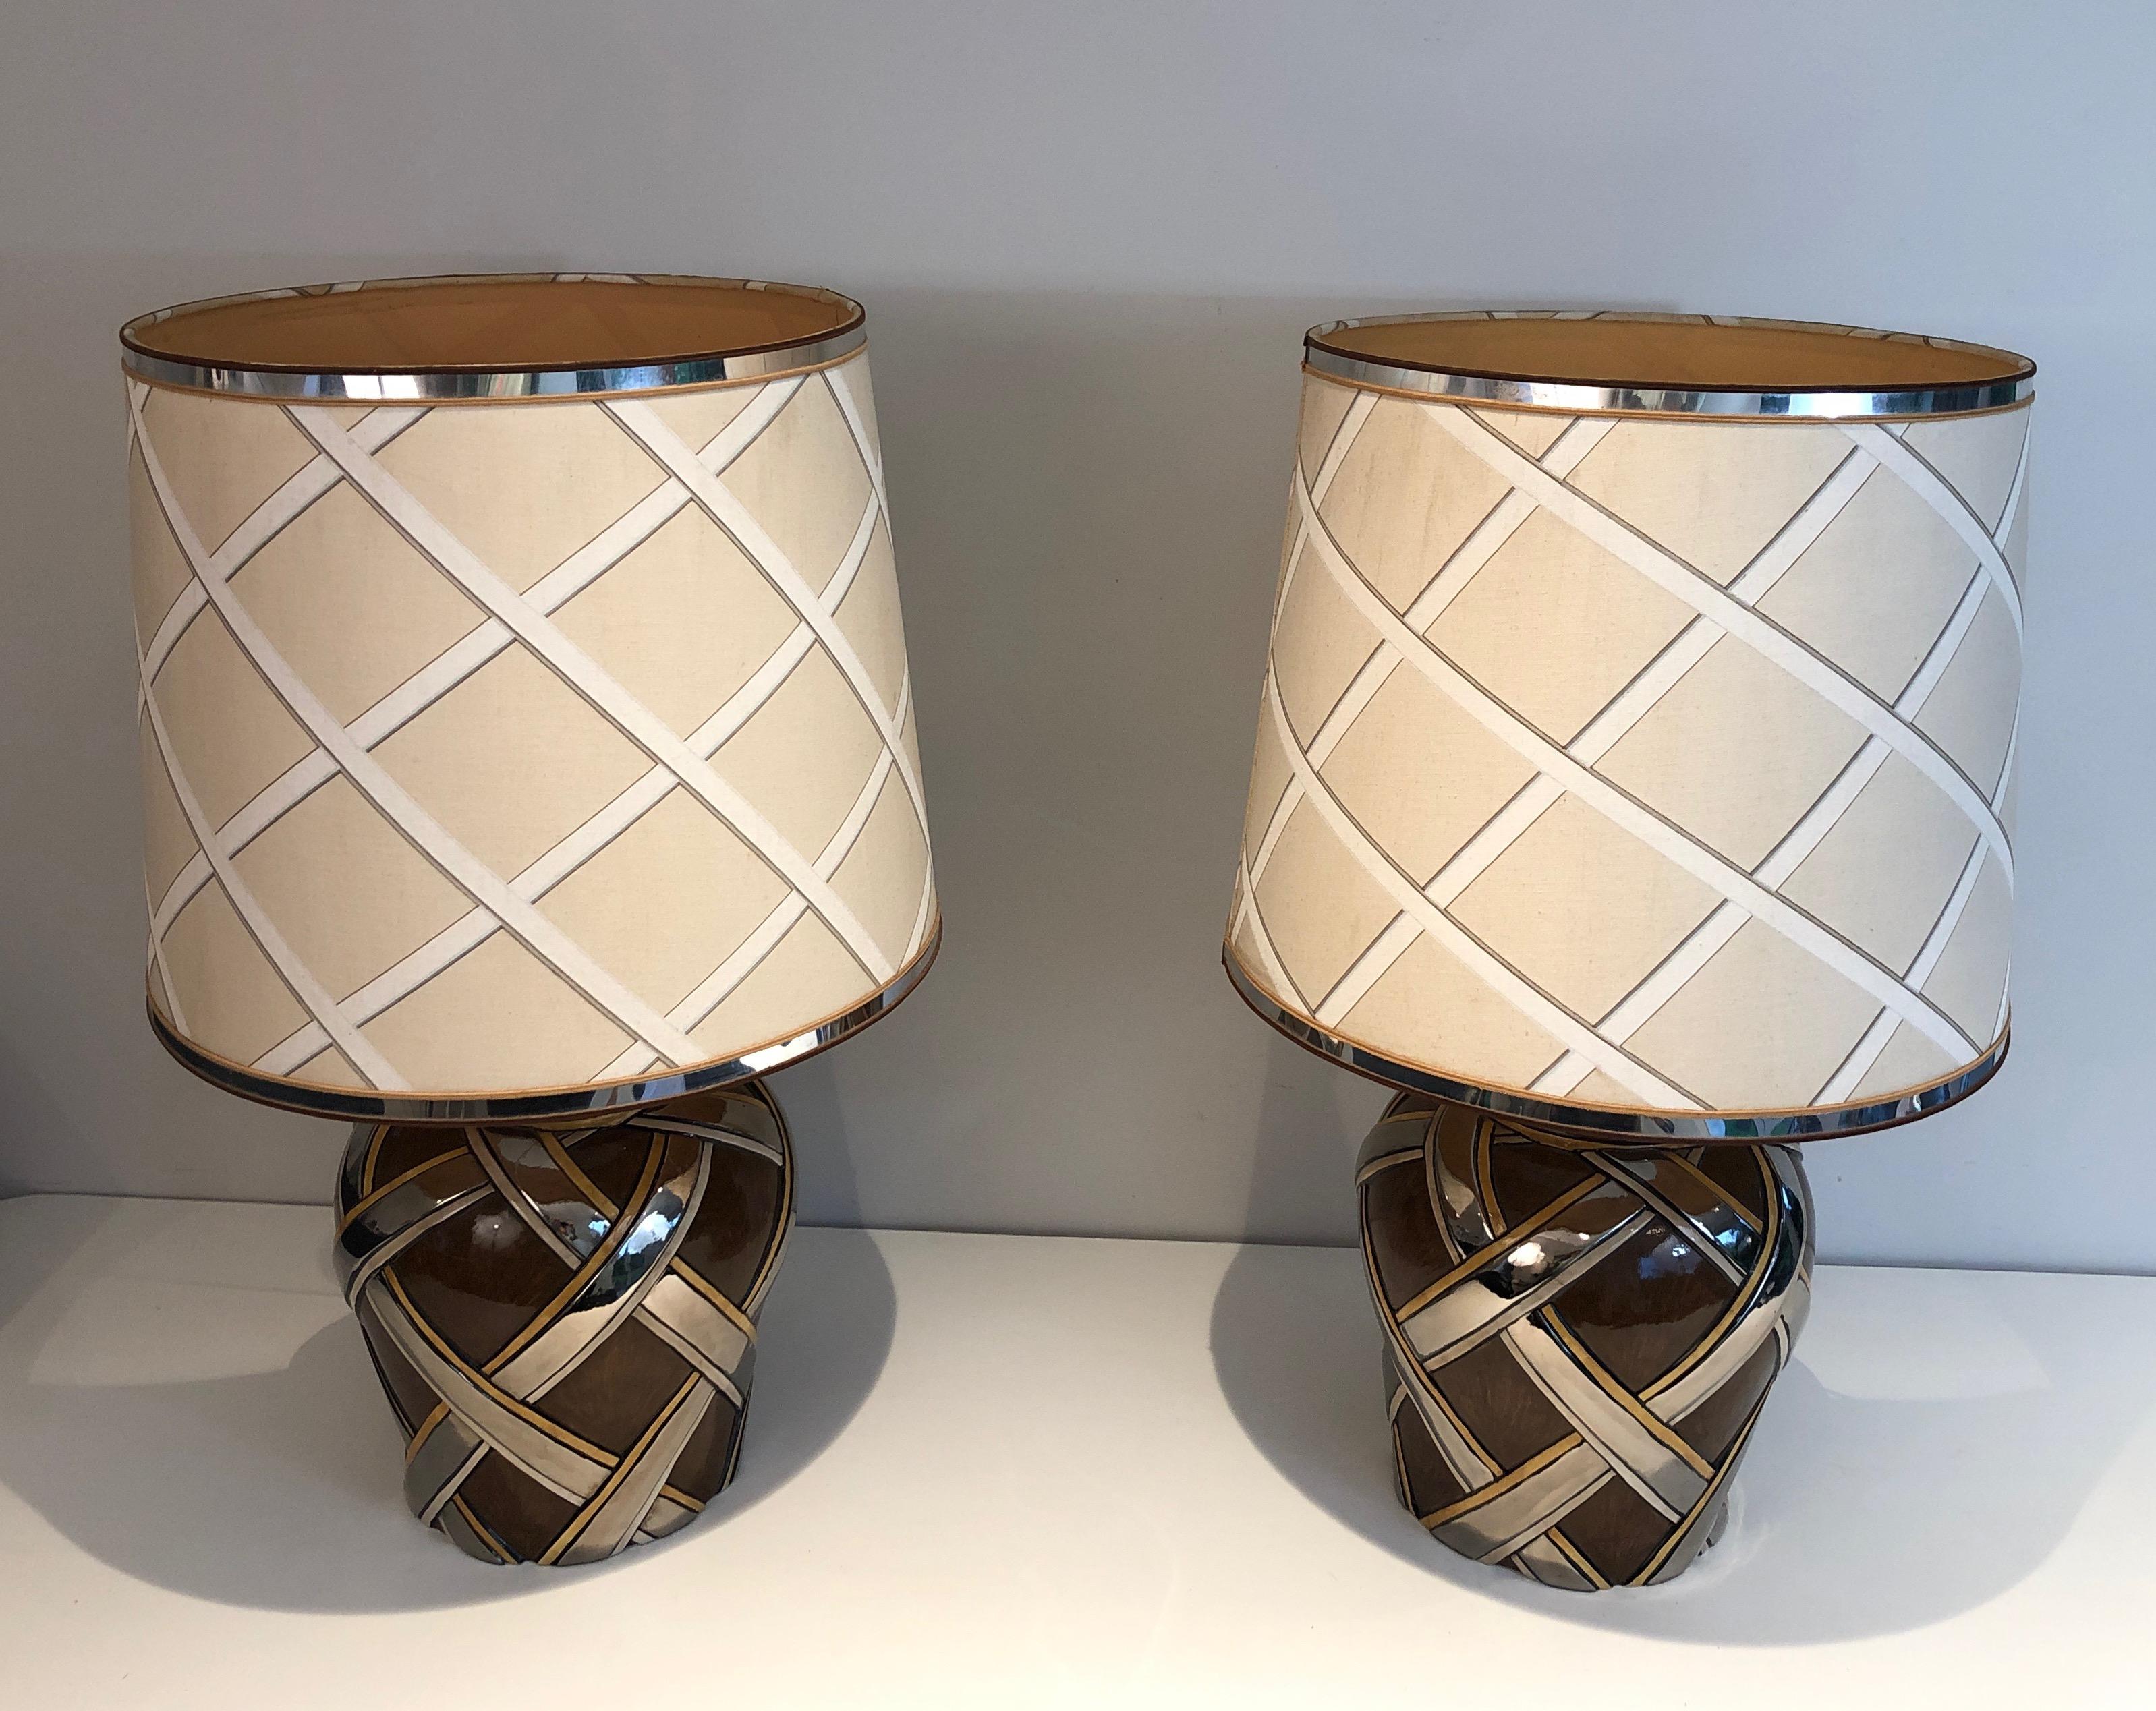 Late 20th Century Important Pair of Ceramic Lamps with Ribbons Decor, French, Circa 1970 For Sale